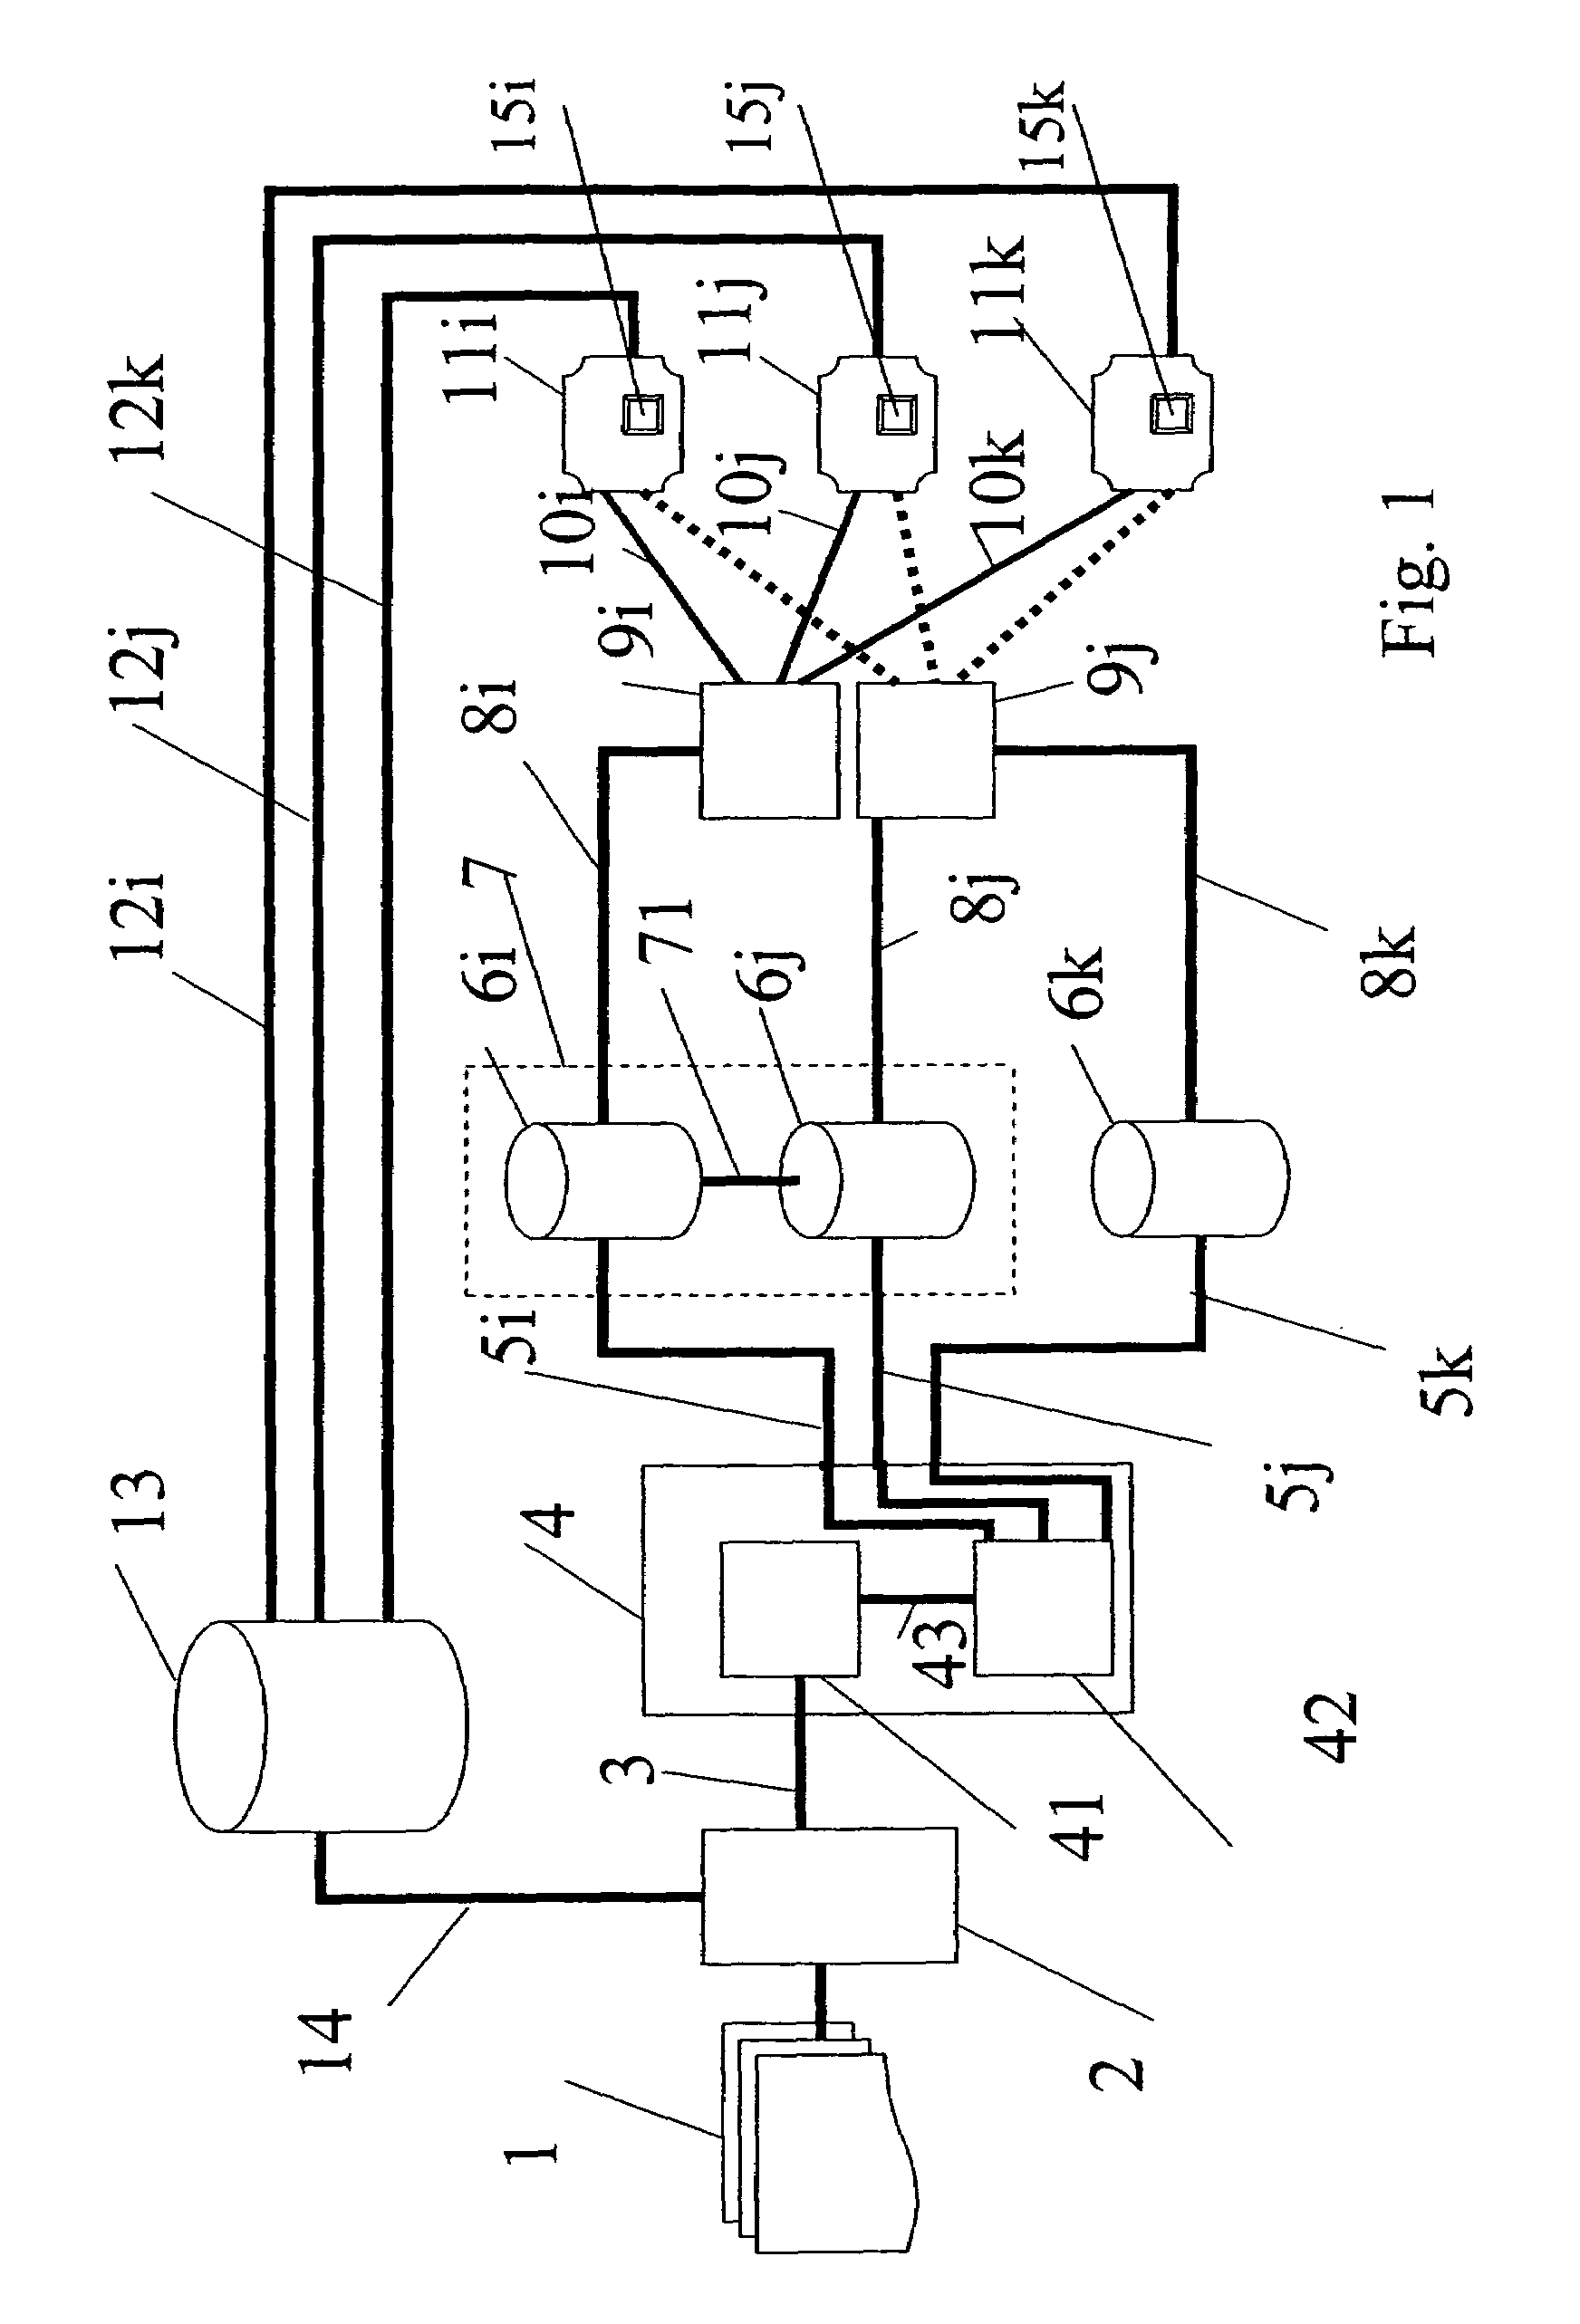 Distributed and secured method and system for protecting and distributing audiovisual flows